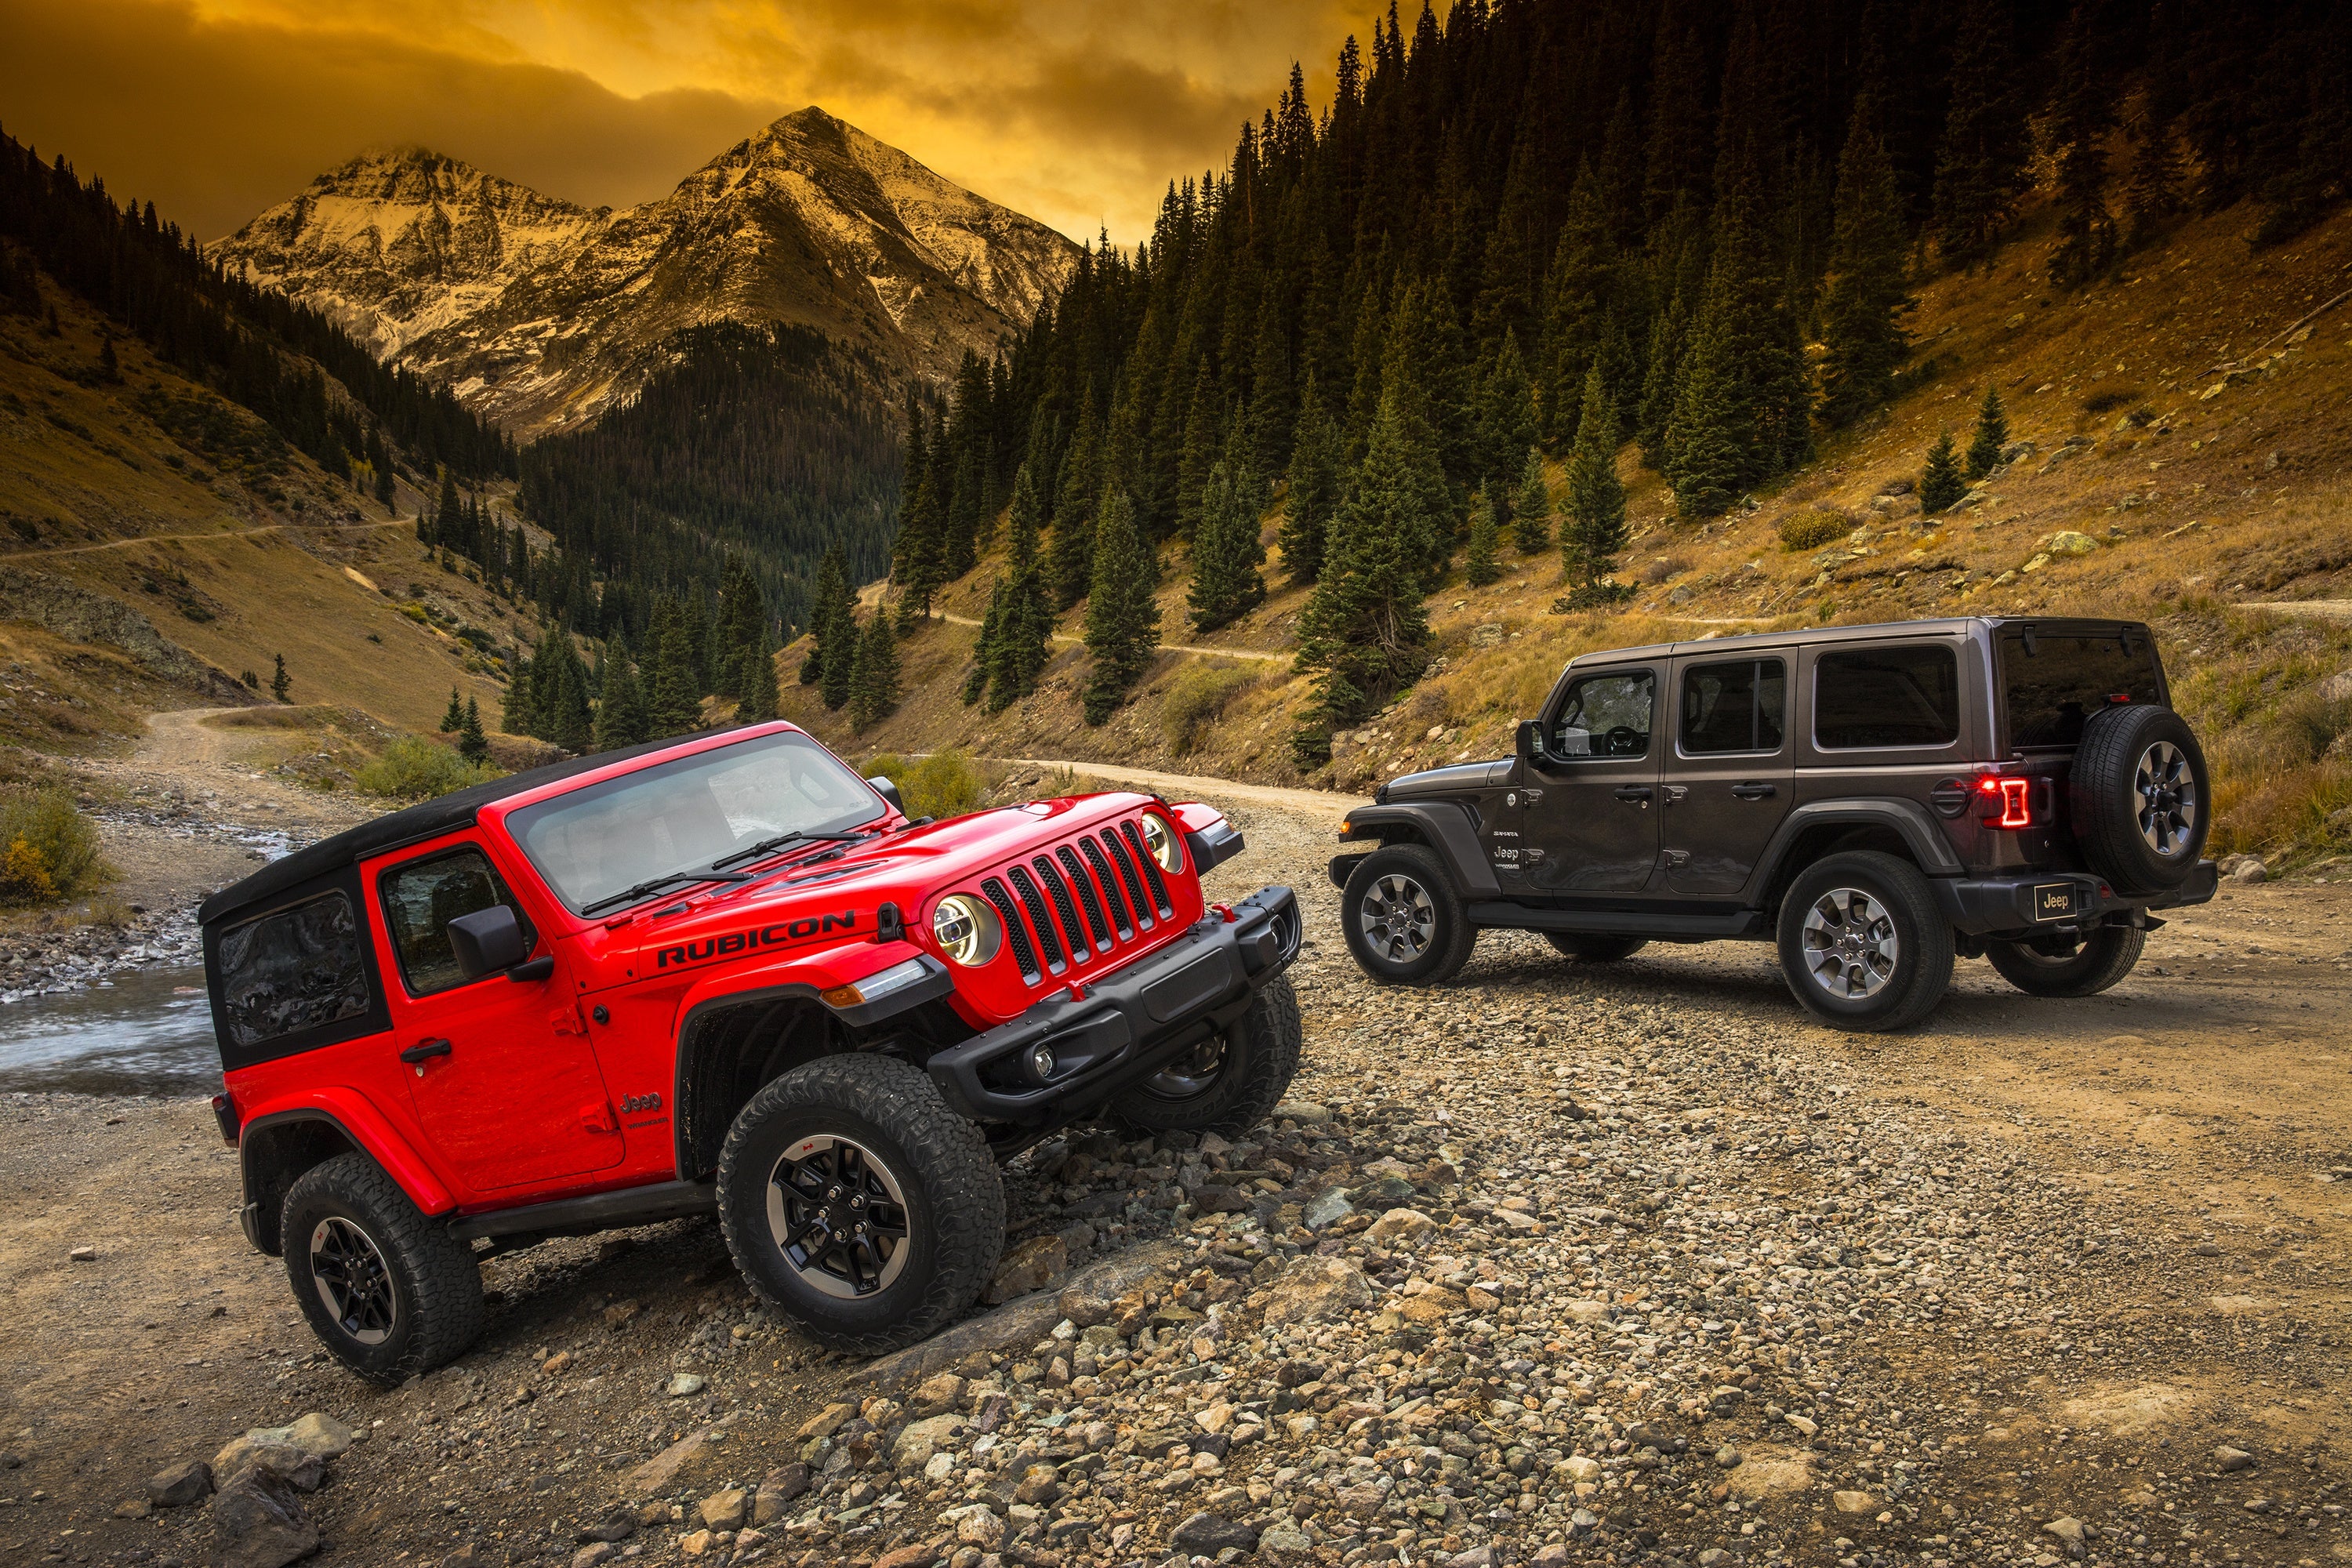 2018 Jeep Wrangler Turbo Available Now with a $3000 Price Tag 